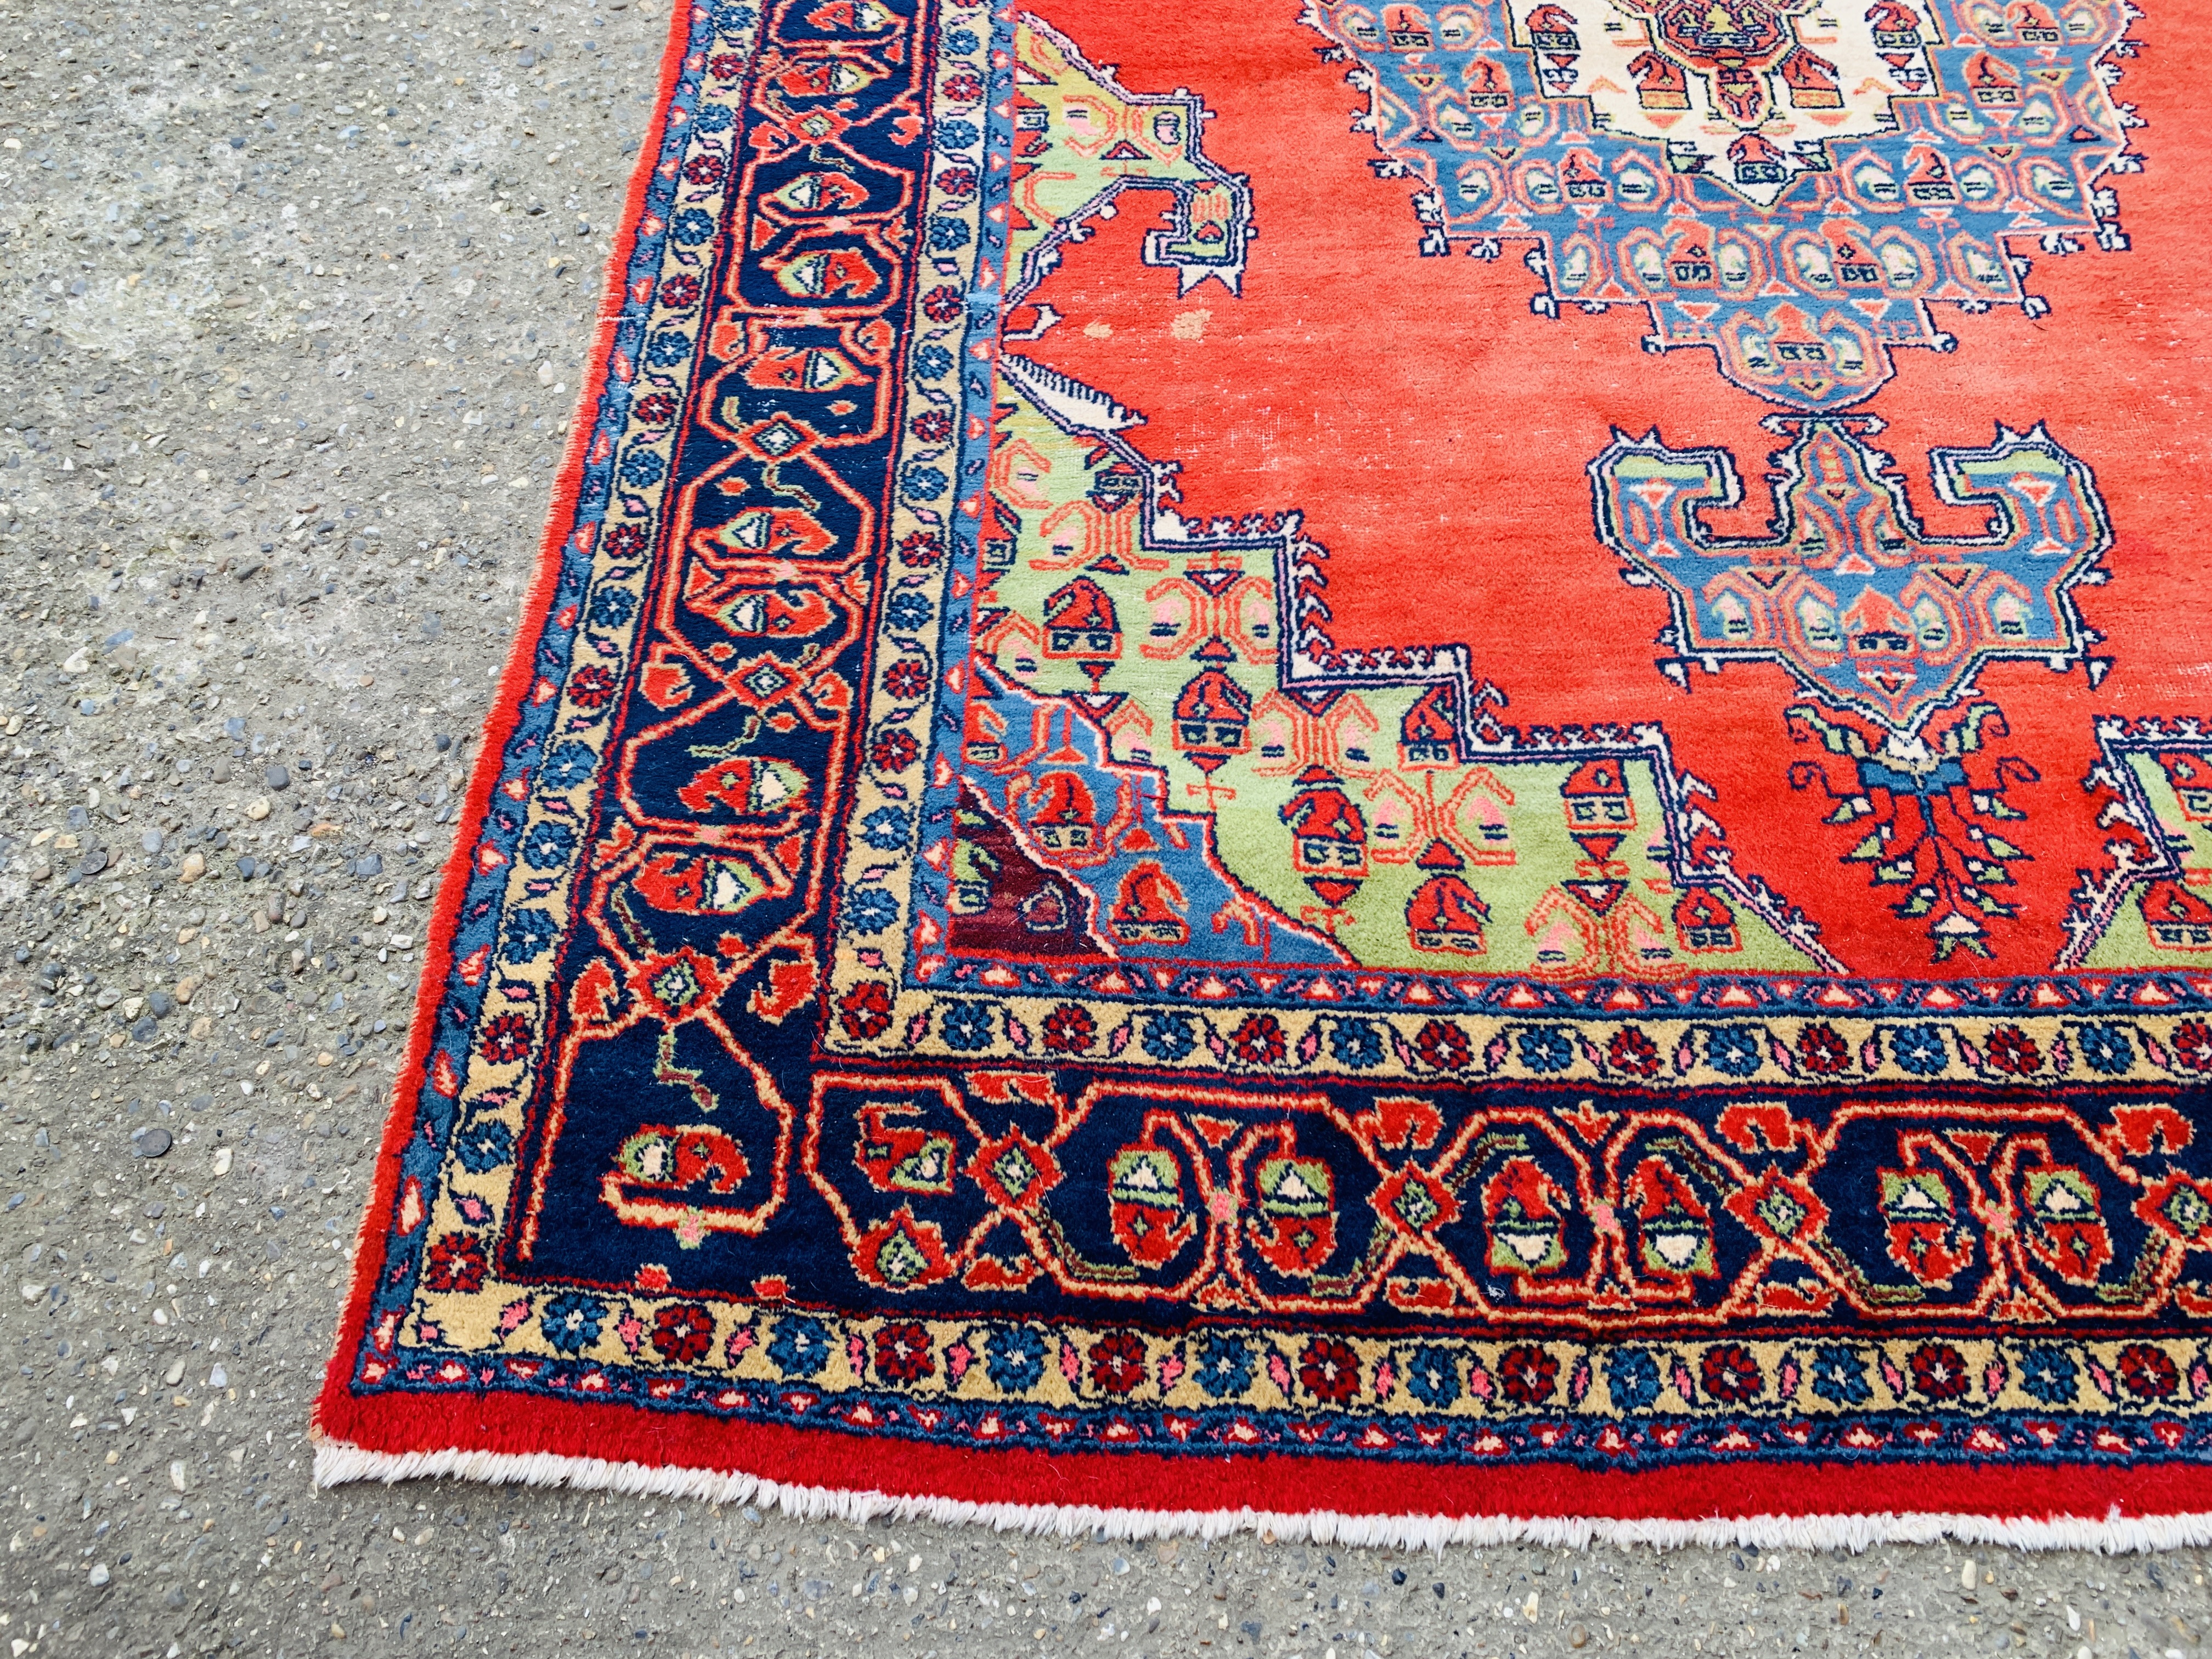 A GOOD QUALITY RED / BLUE PATTERNED EASTERN CARPET 3.3M X 3.15M. - Image 2 of 11